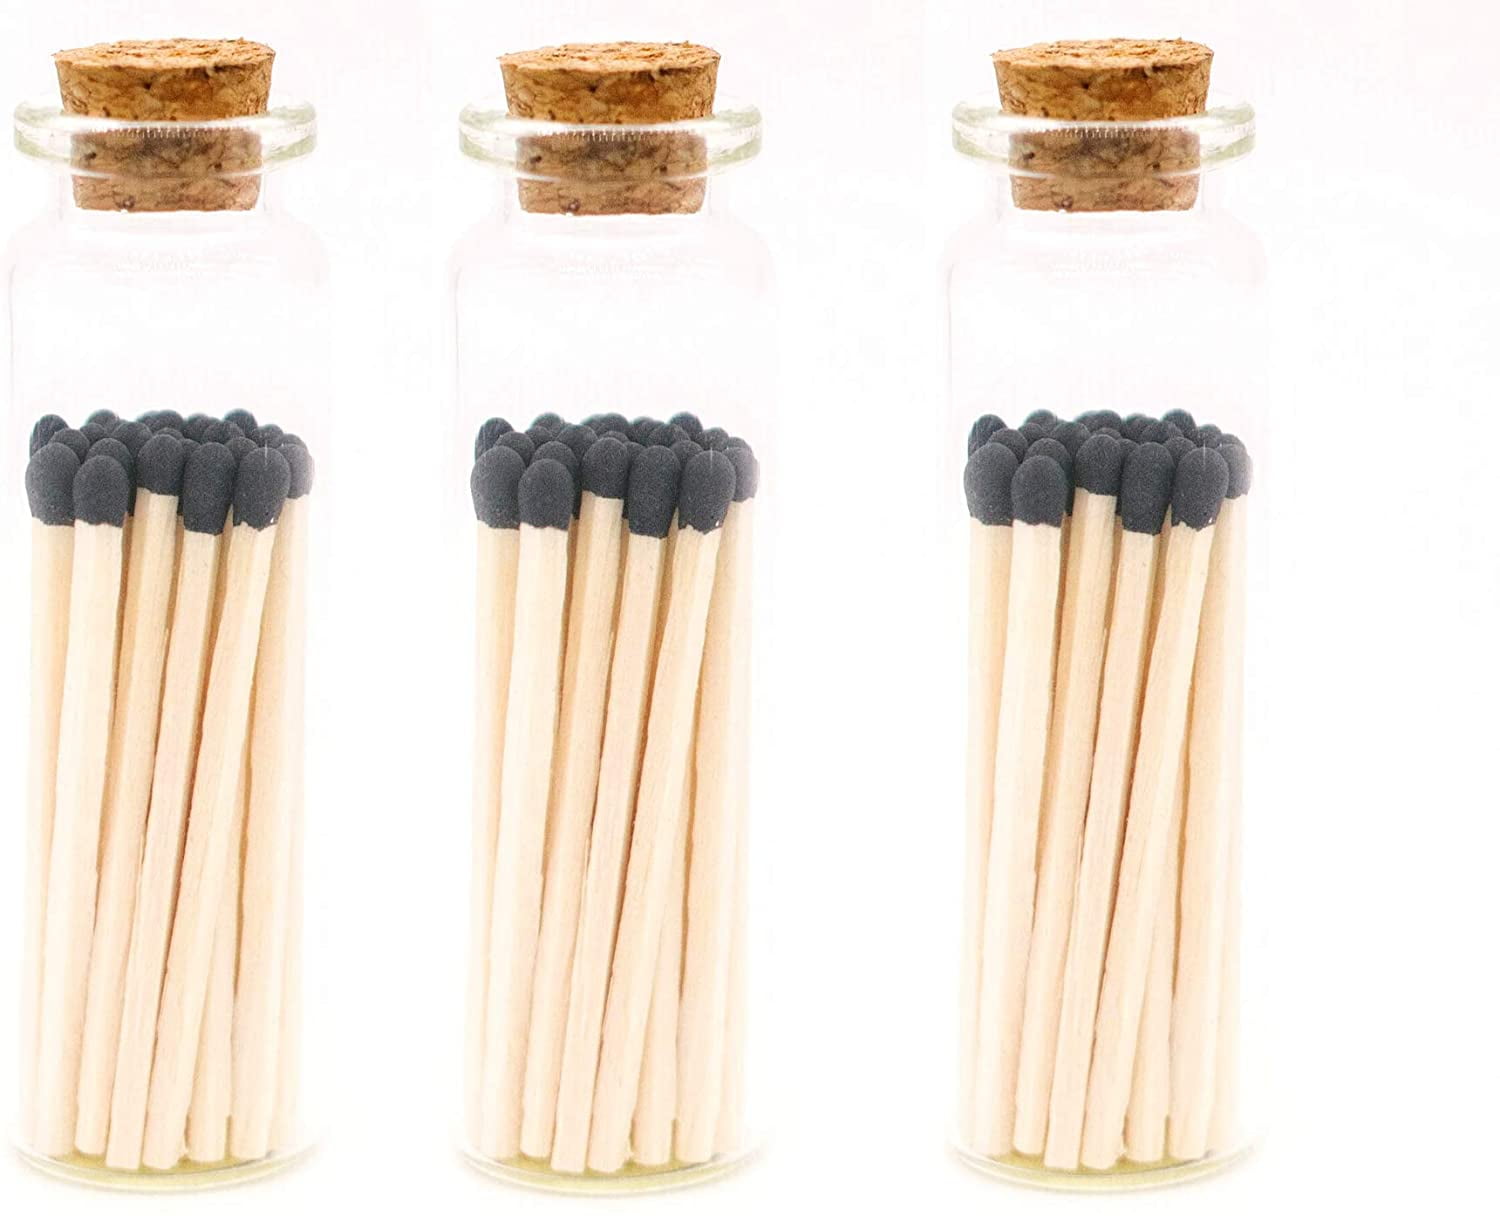 Big Colorful Matches in Glass Jar Candle Decor & Accessories Home  Decoration 4 Safety Matches Matchstick Jar Apothecary Matches 